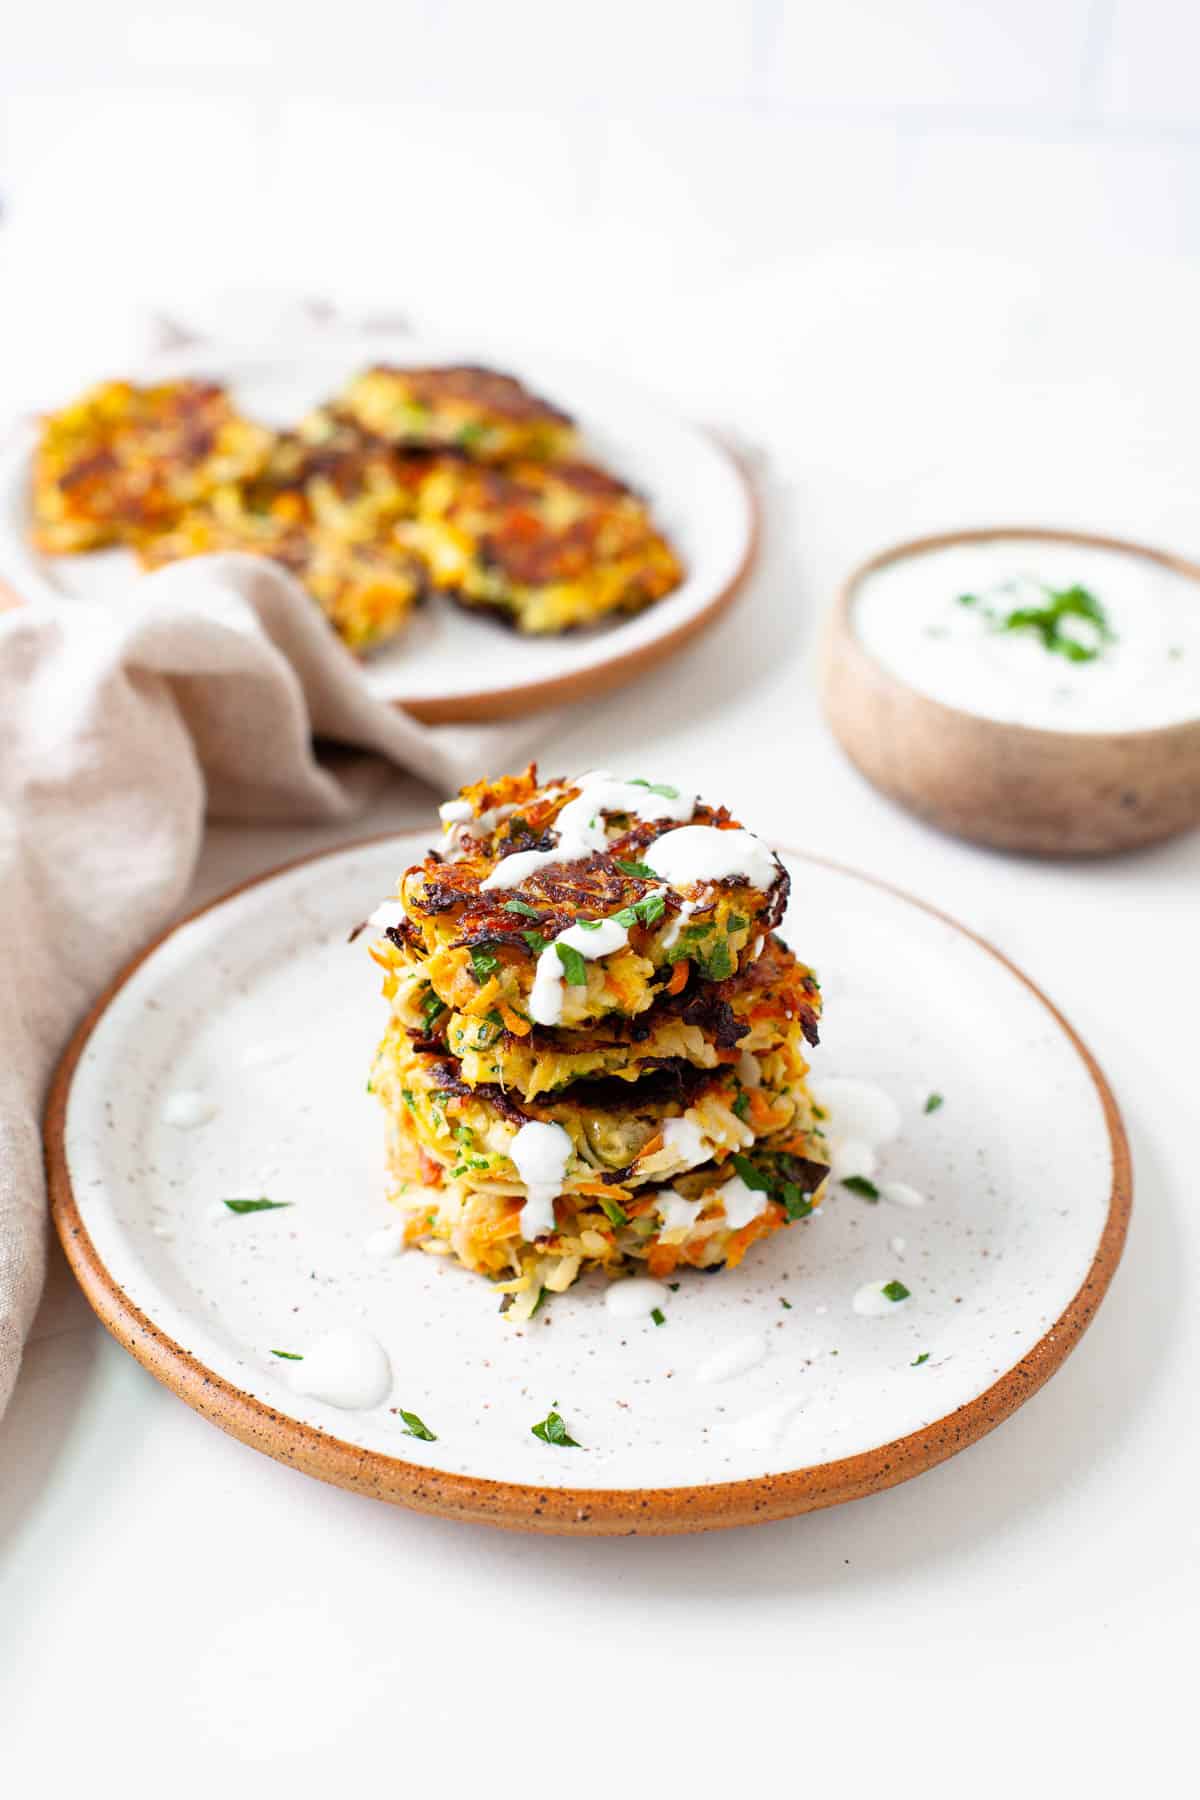 stack of four kohlrabi fritters on a speckled plate with herbed yogurt sauce and parsley on top